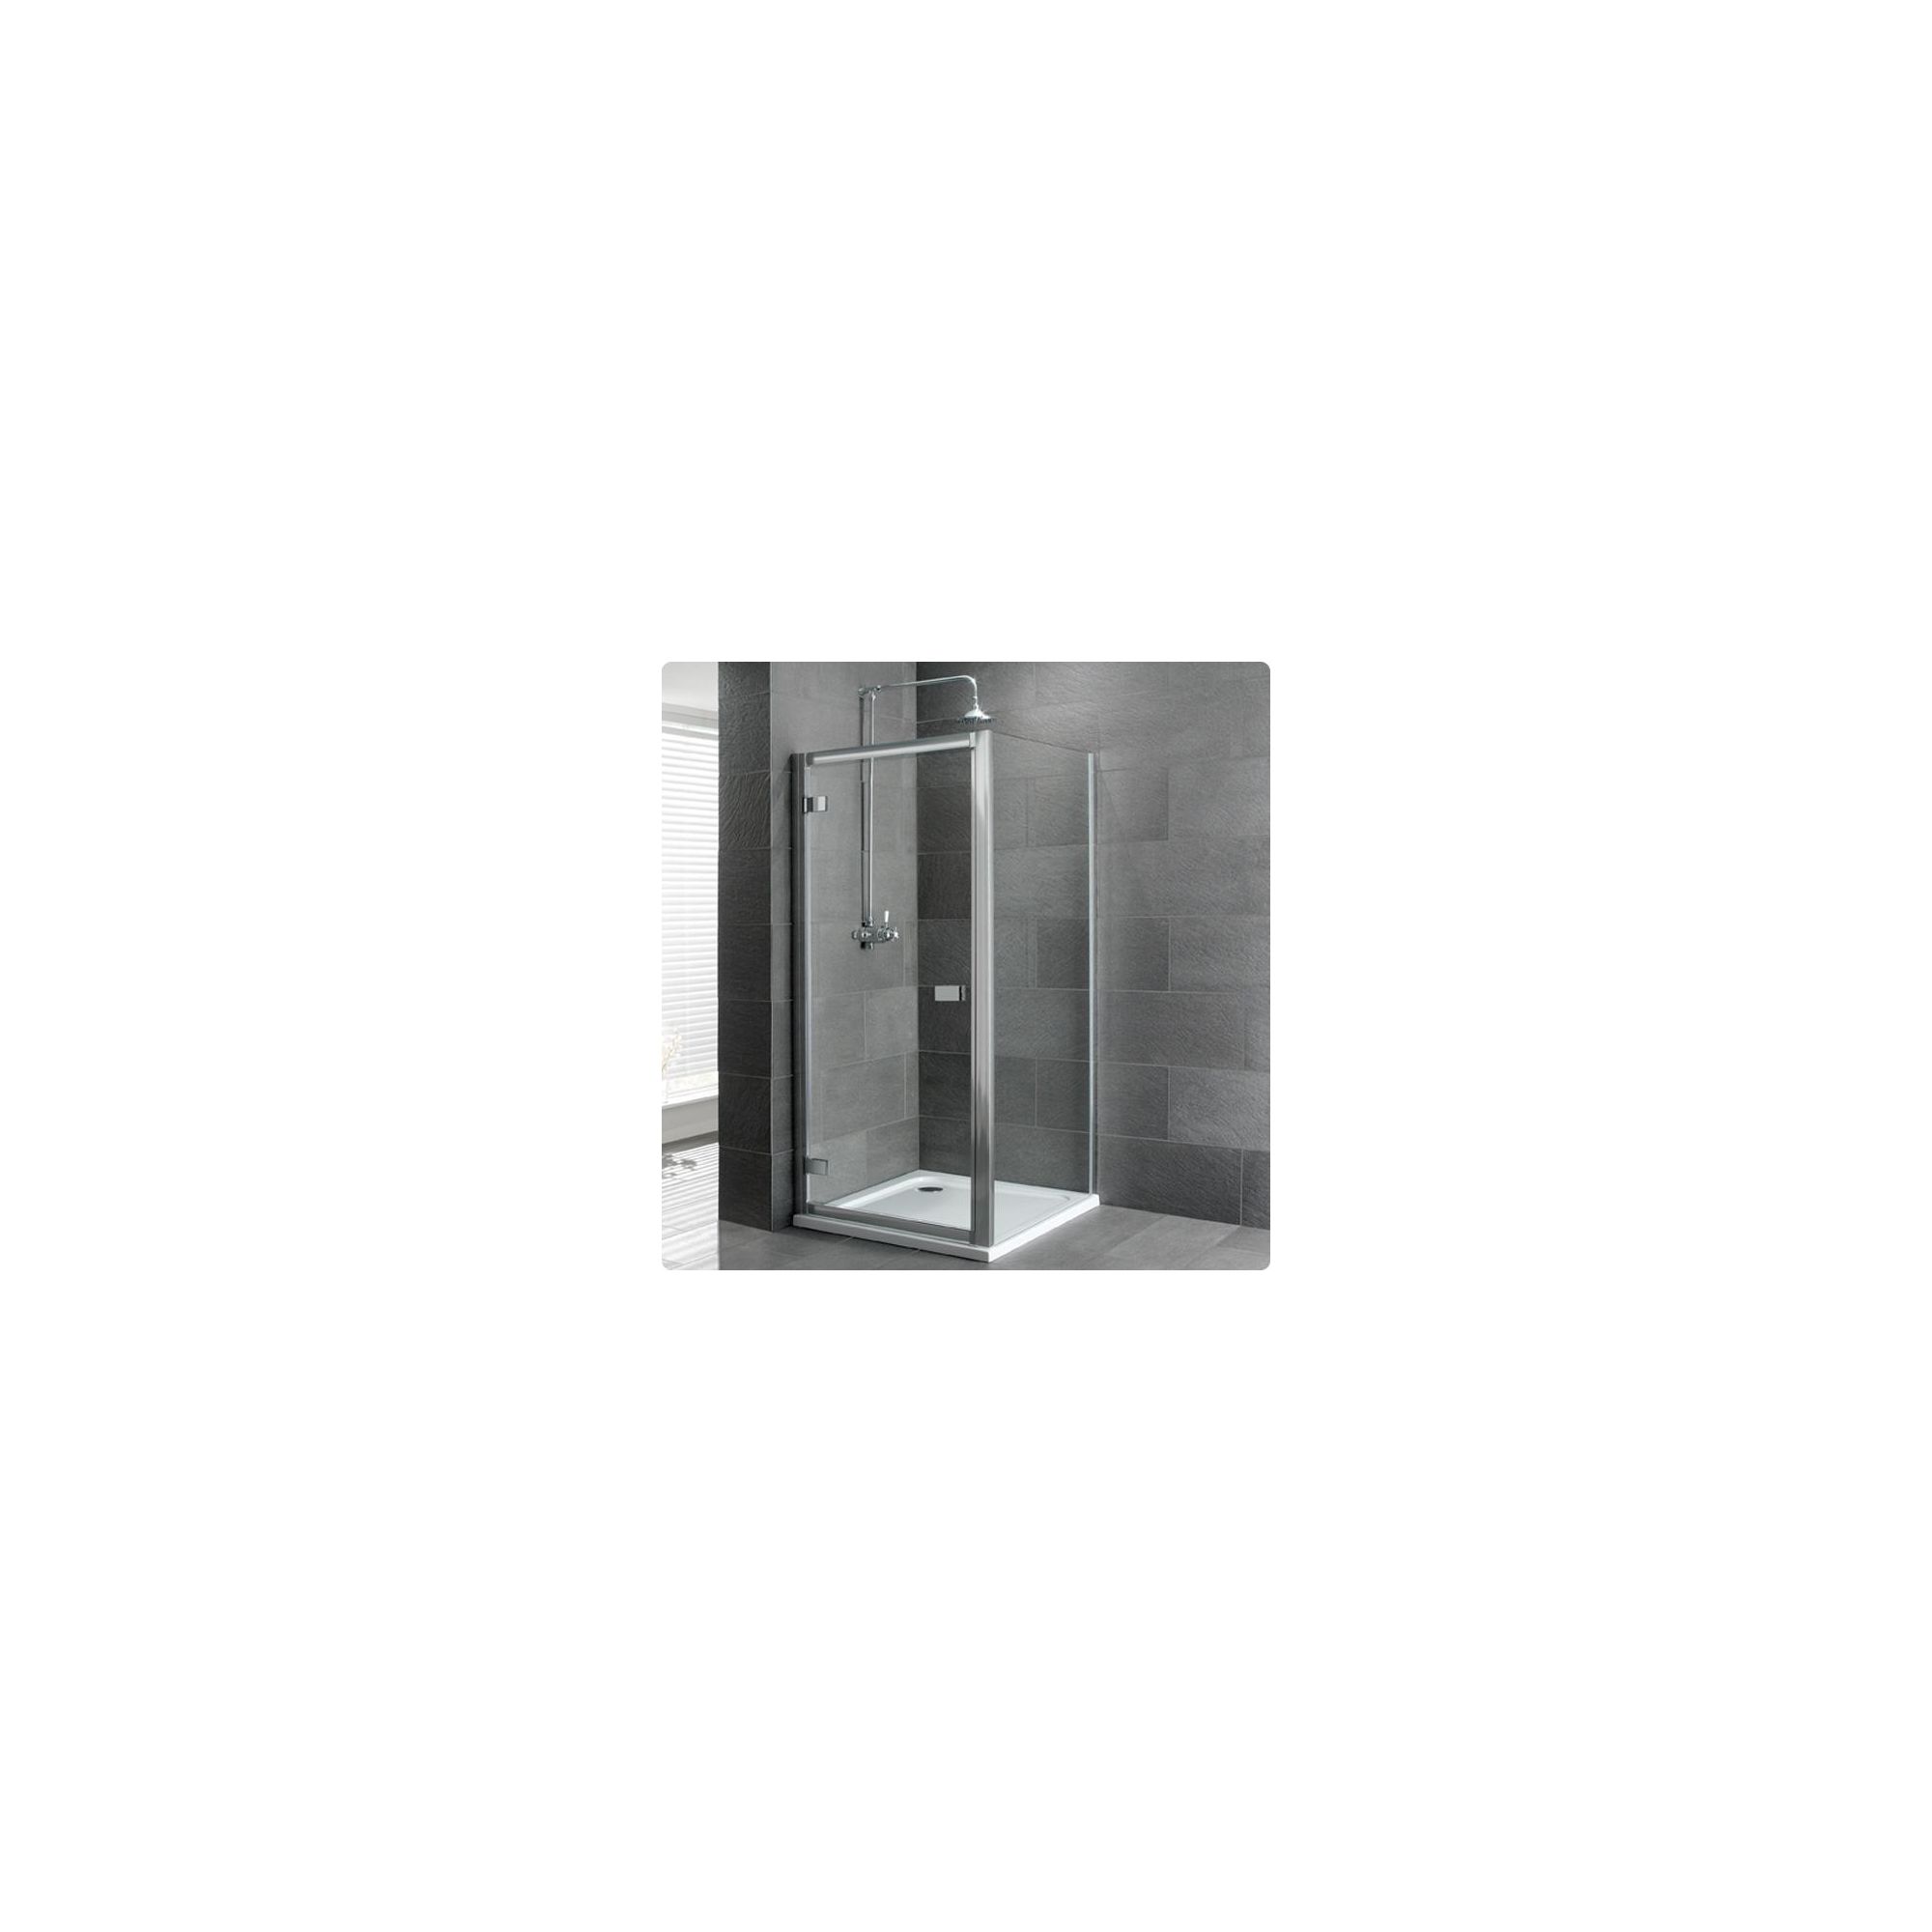 Duchy Select Silver Hinged Door Shower Enclosure, 900mm x 700mm, Standard Tray, 6mm Glass at Tesco Direct